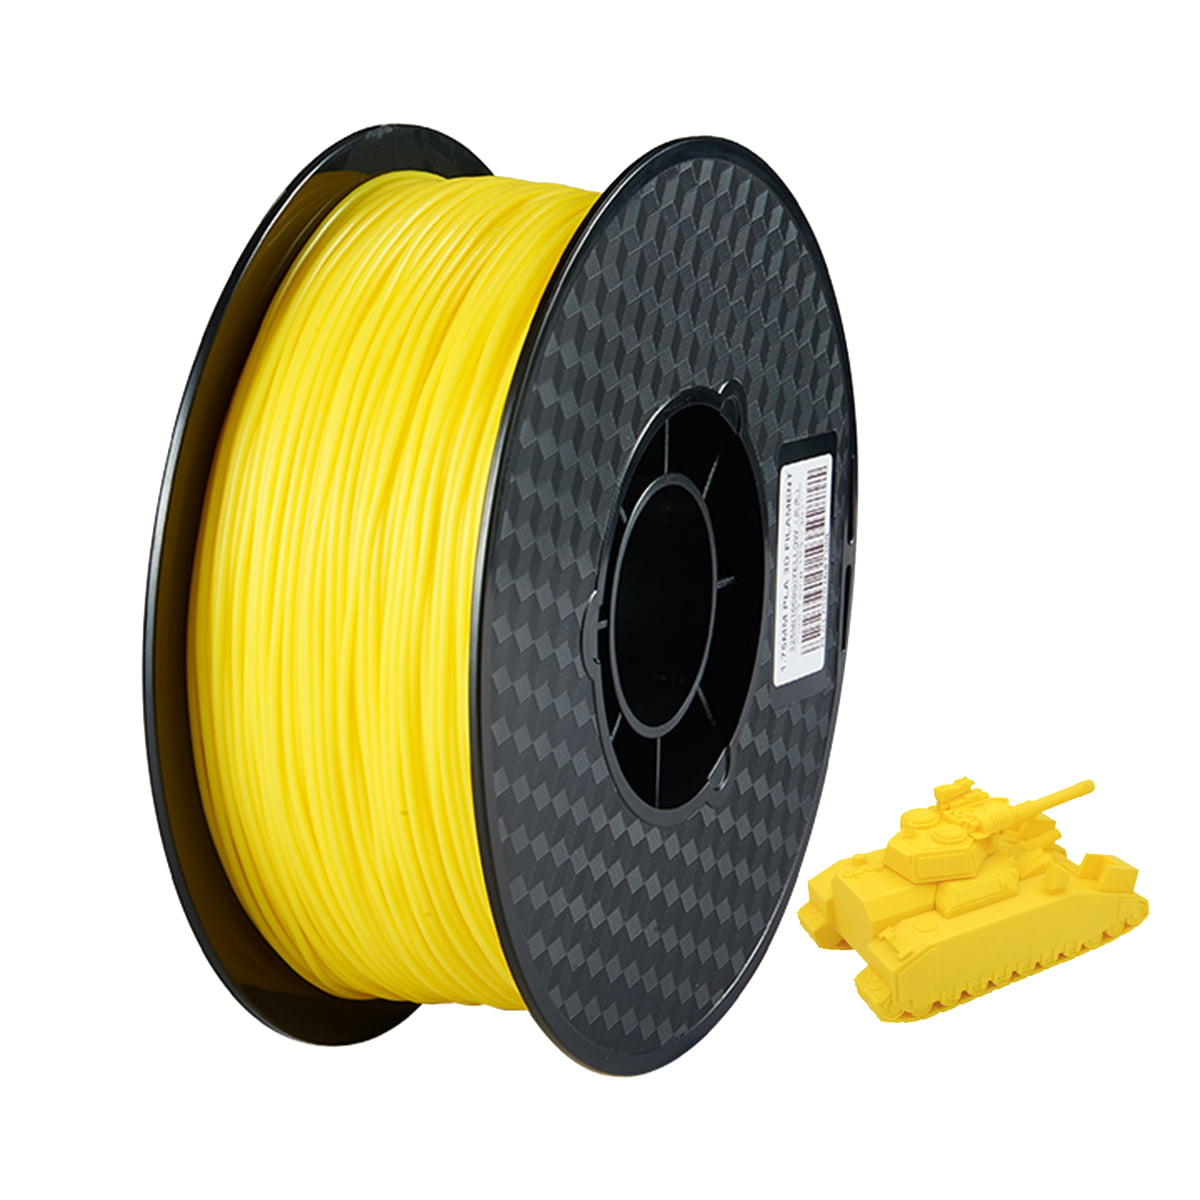 1KG Spool 2.2LBS Dimensional Accuracy +/- 0.05 mm Color Changing with Temperature 3D Printer PLA Filament,from Orange to Yellow,1.75 mm 3D Printing PLA Material